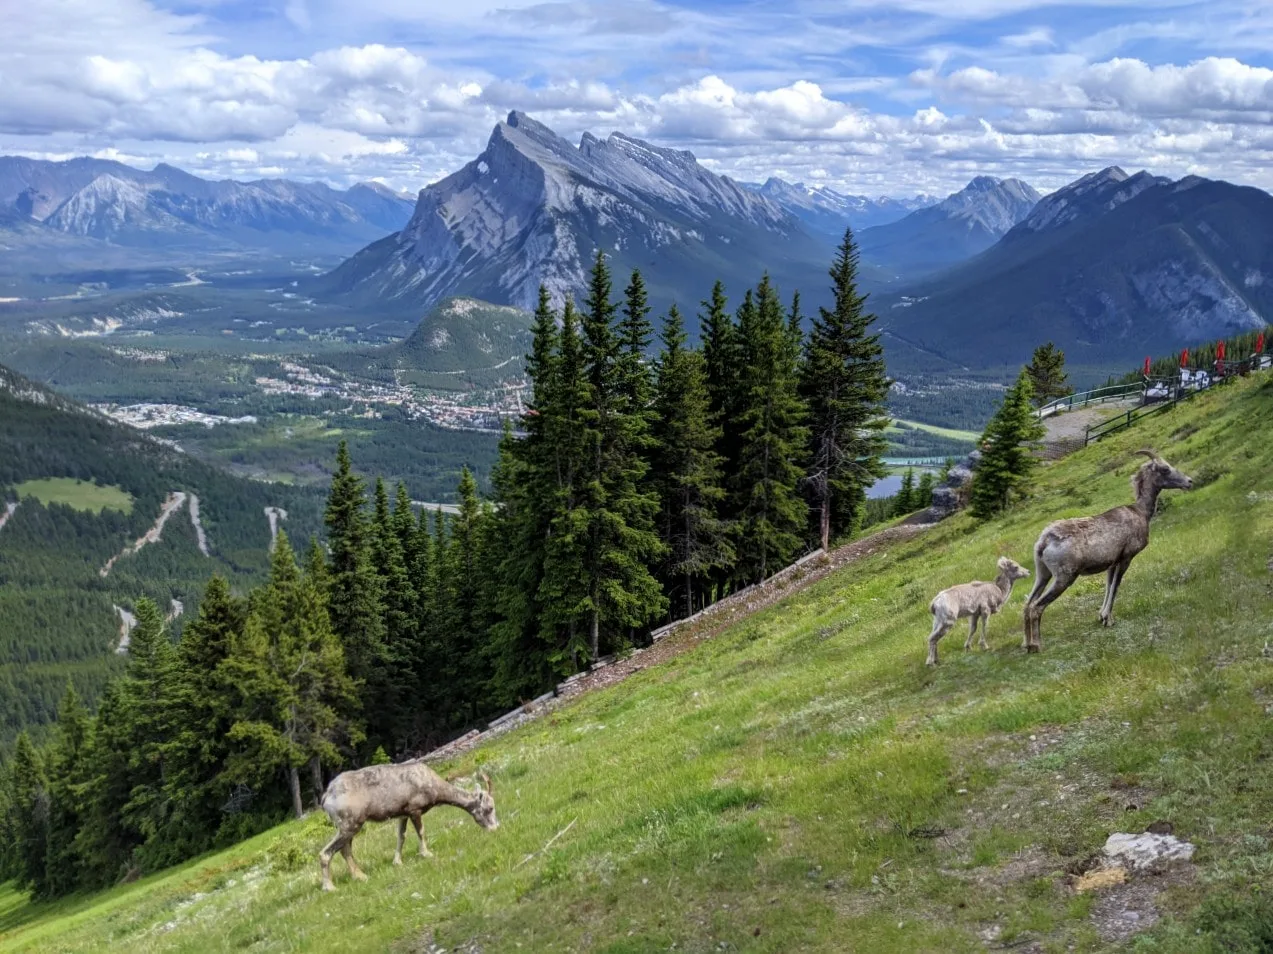 Top of chairlift views with bighorn sheep on grass, in front of mountains 